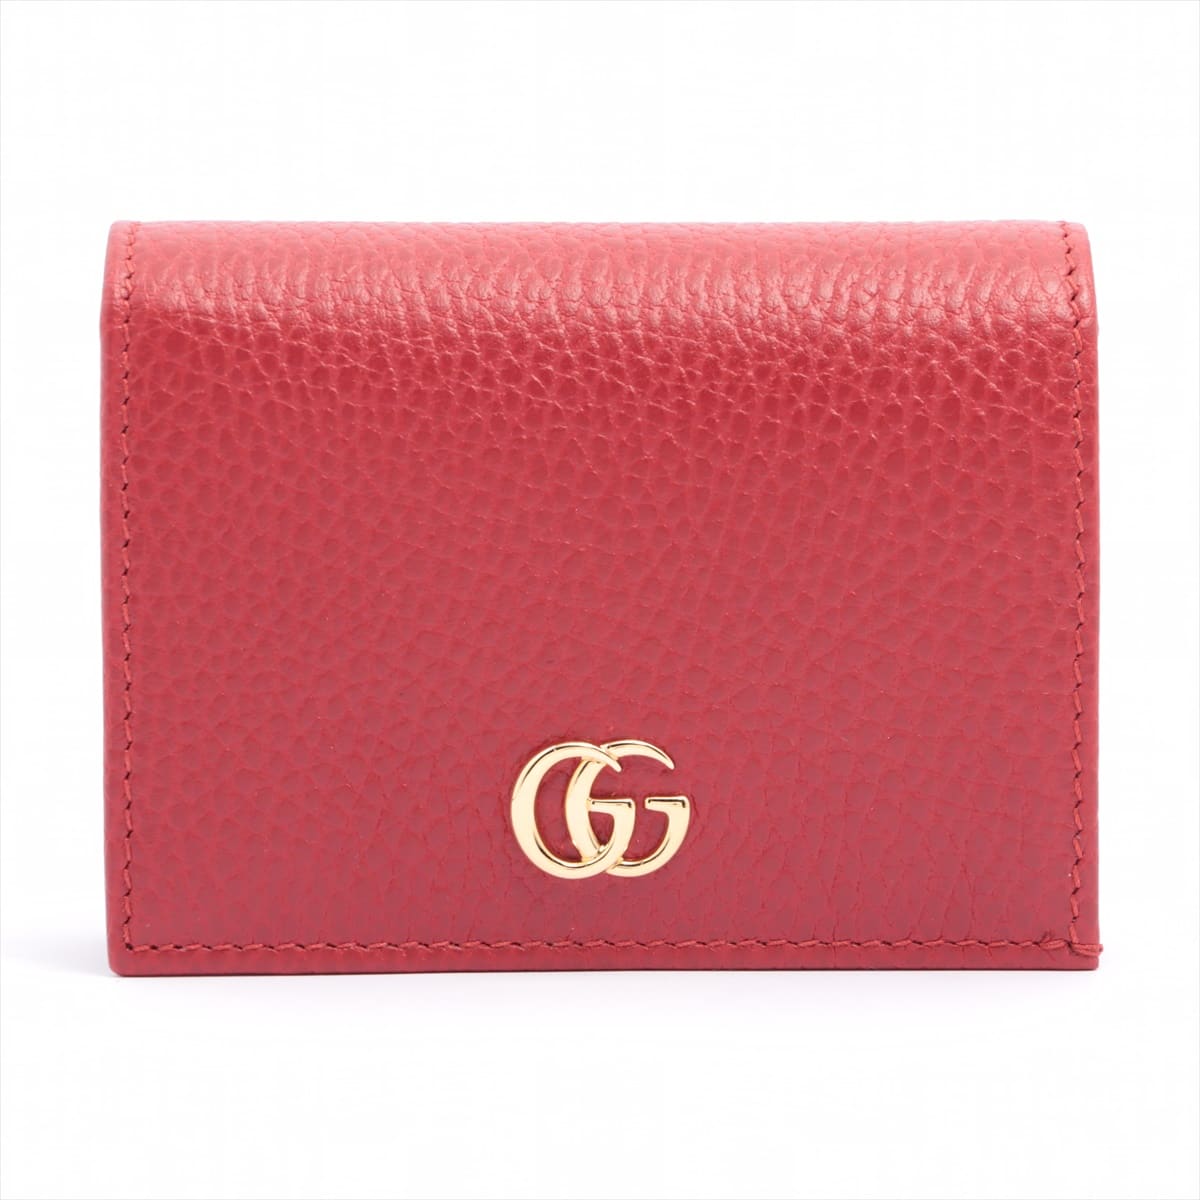 Gucci GG Marmont 456126 Leather Wallet Red